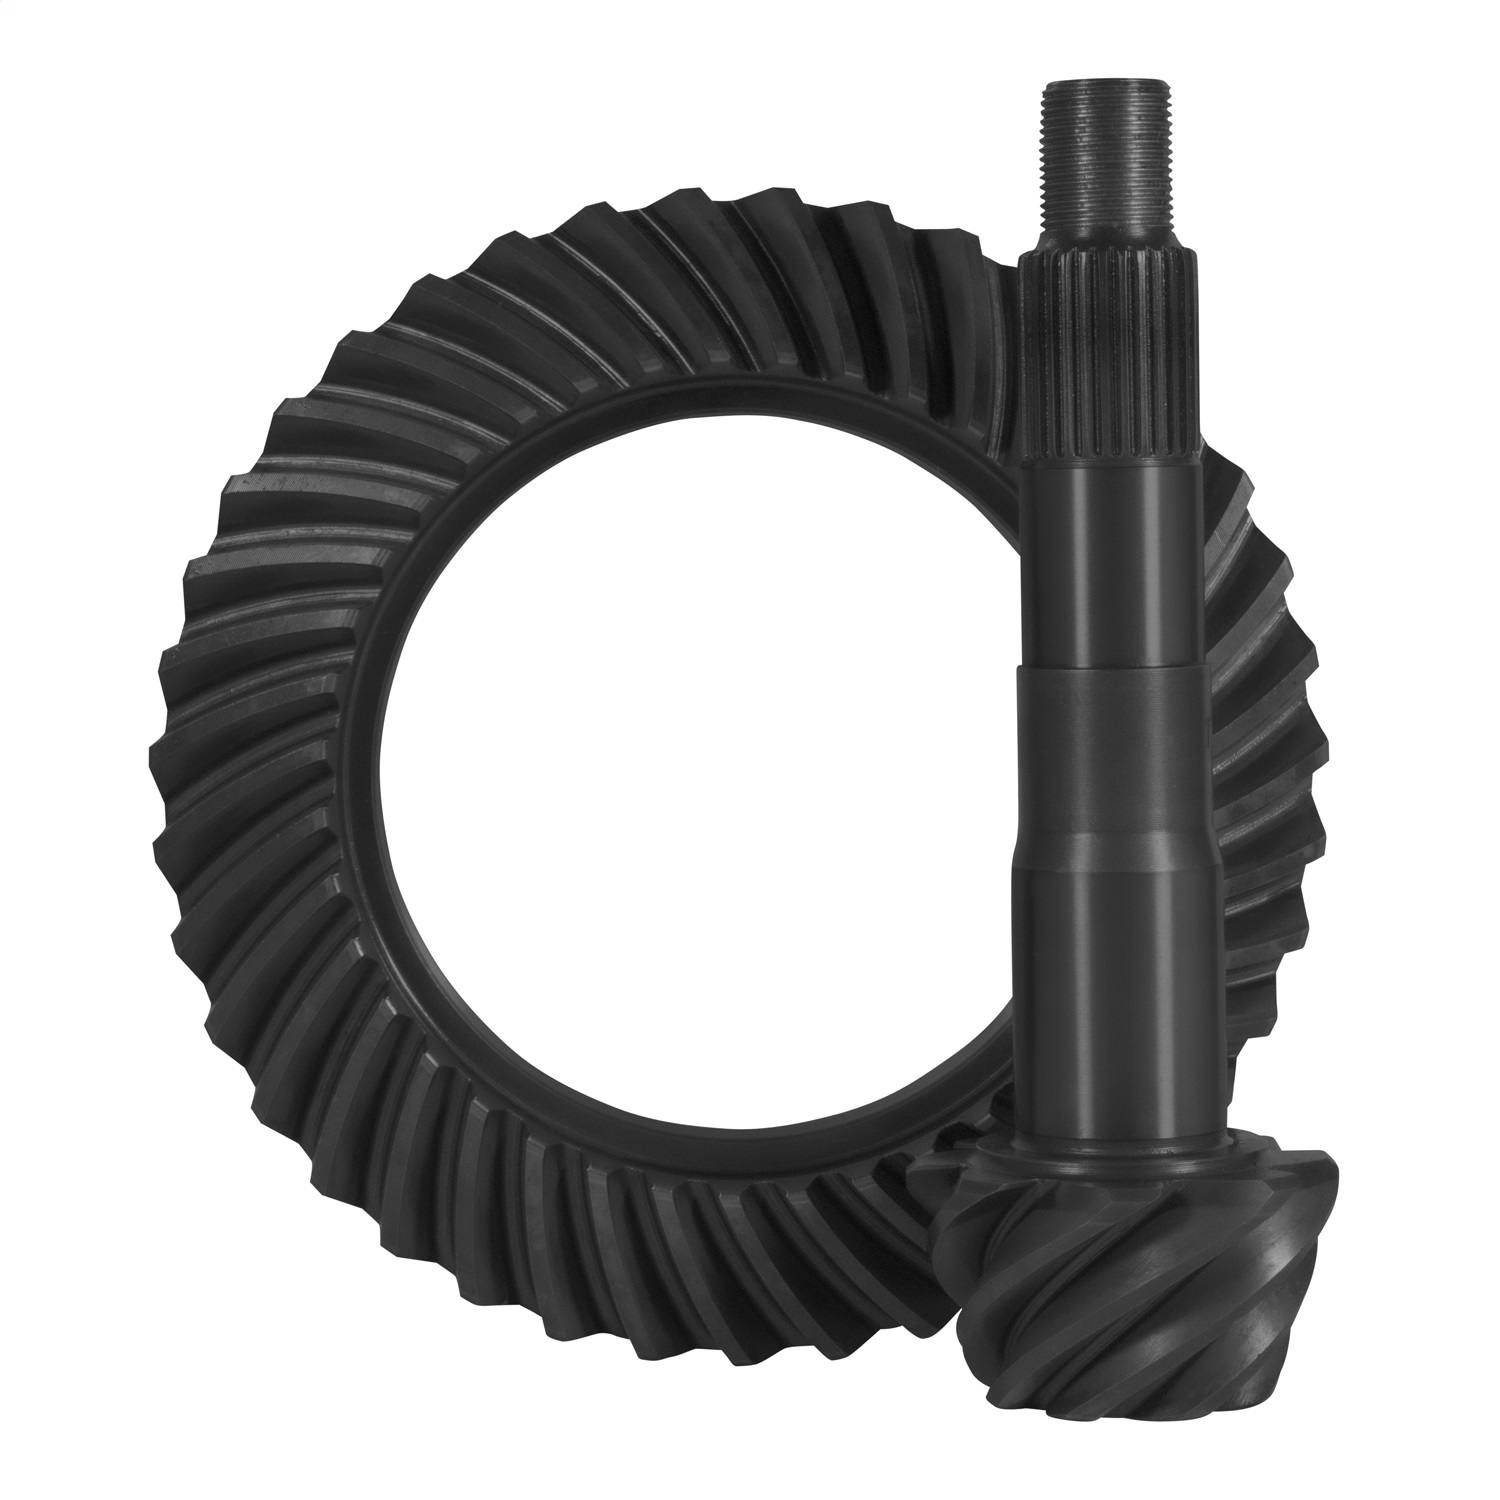 USA Standard Gear ZG TLCF-411R-29 Differential Ring and Pinion